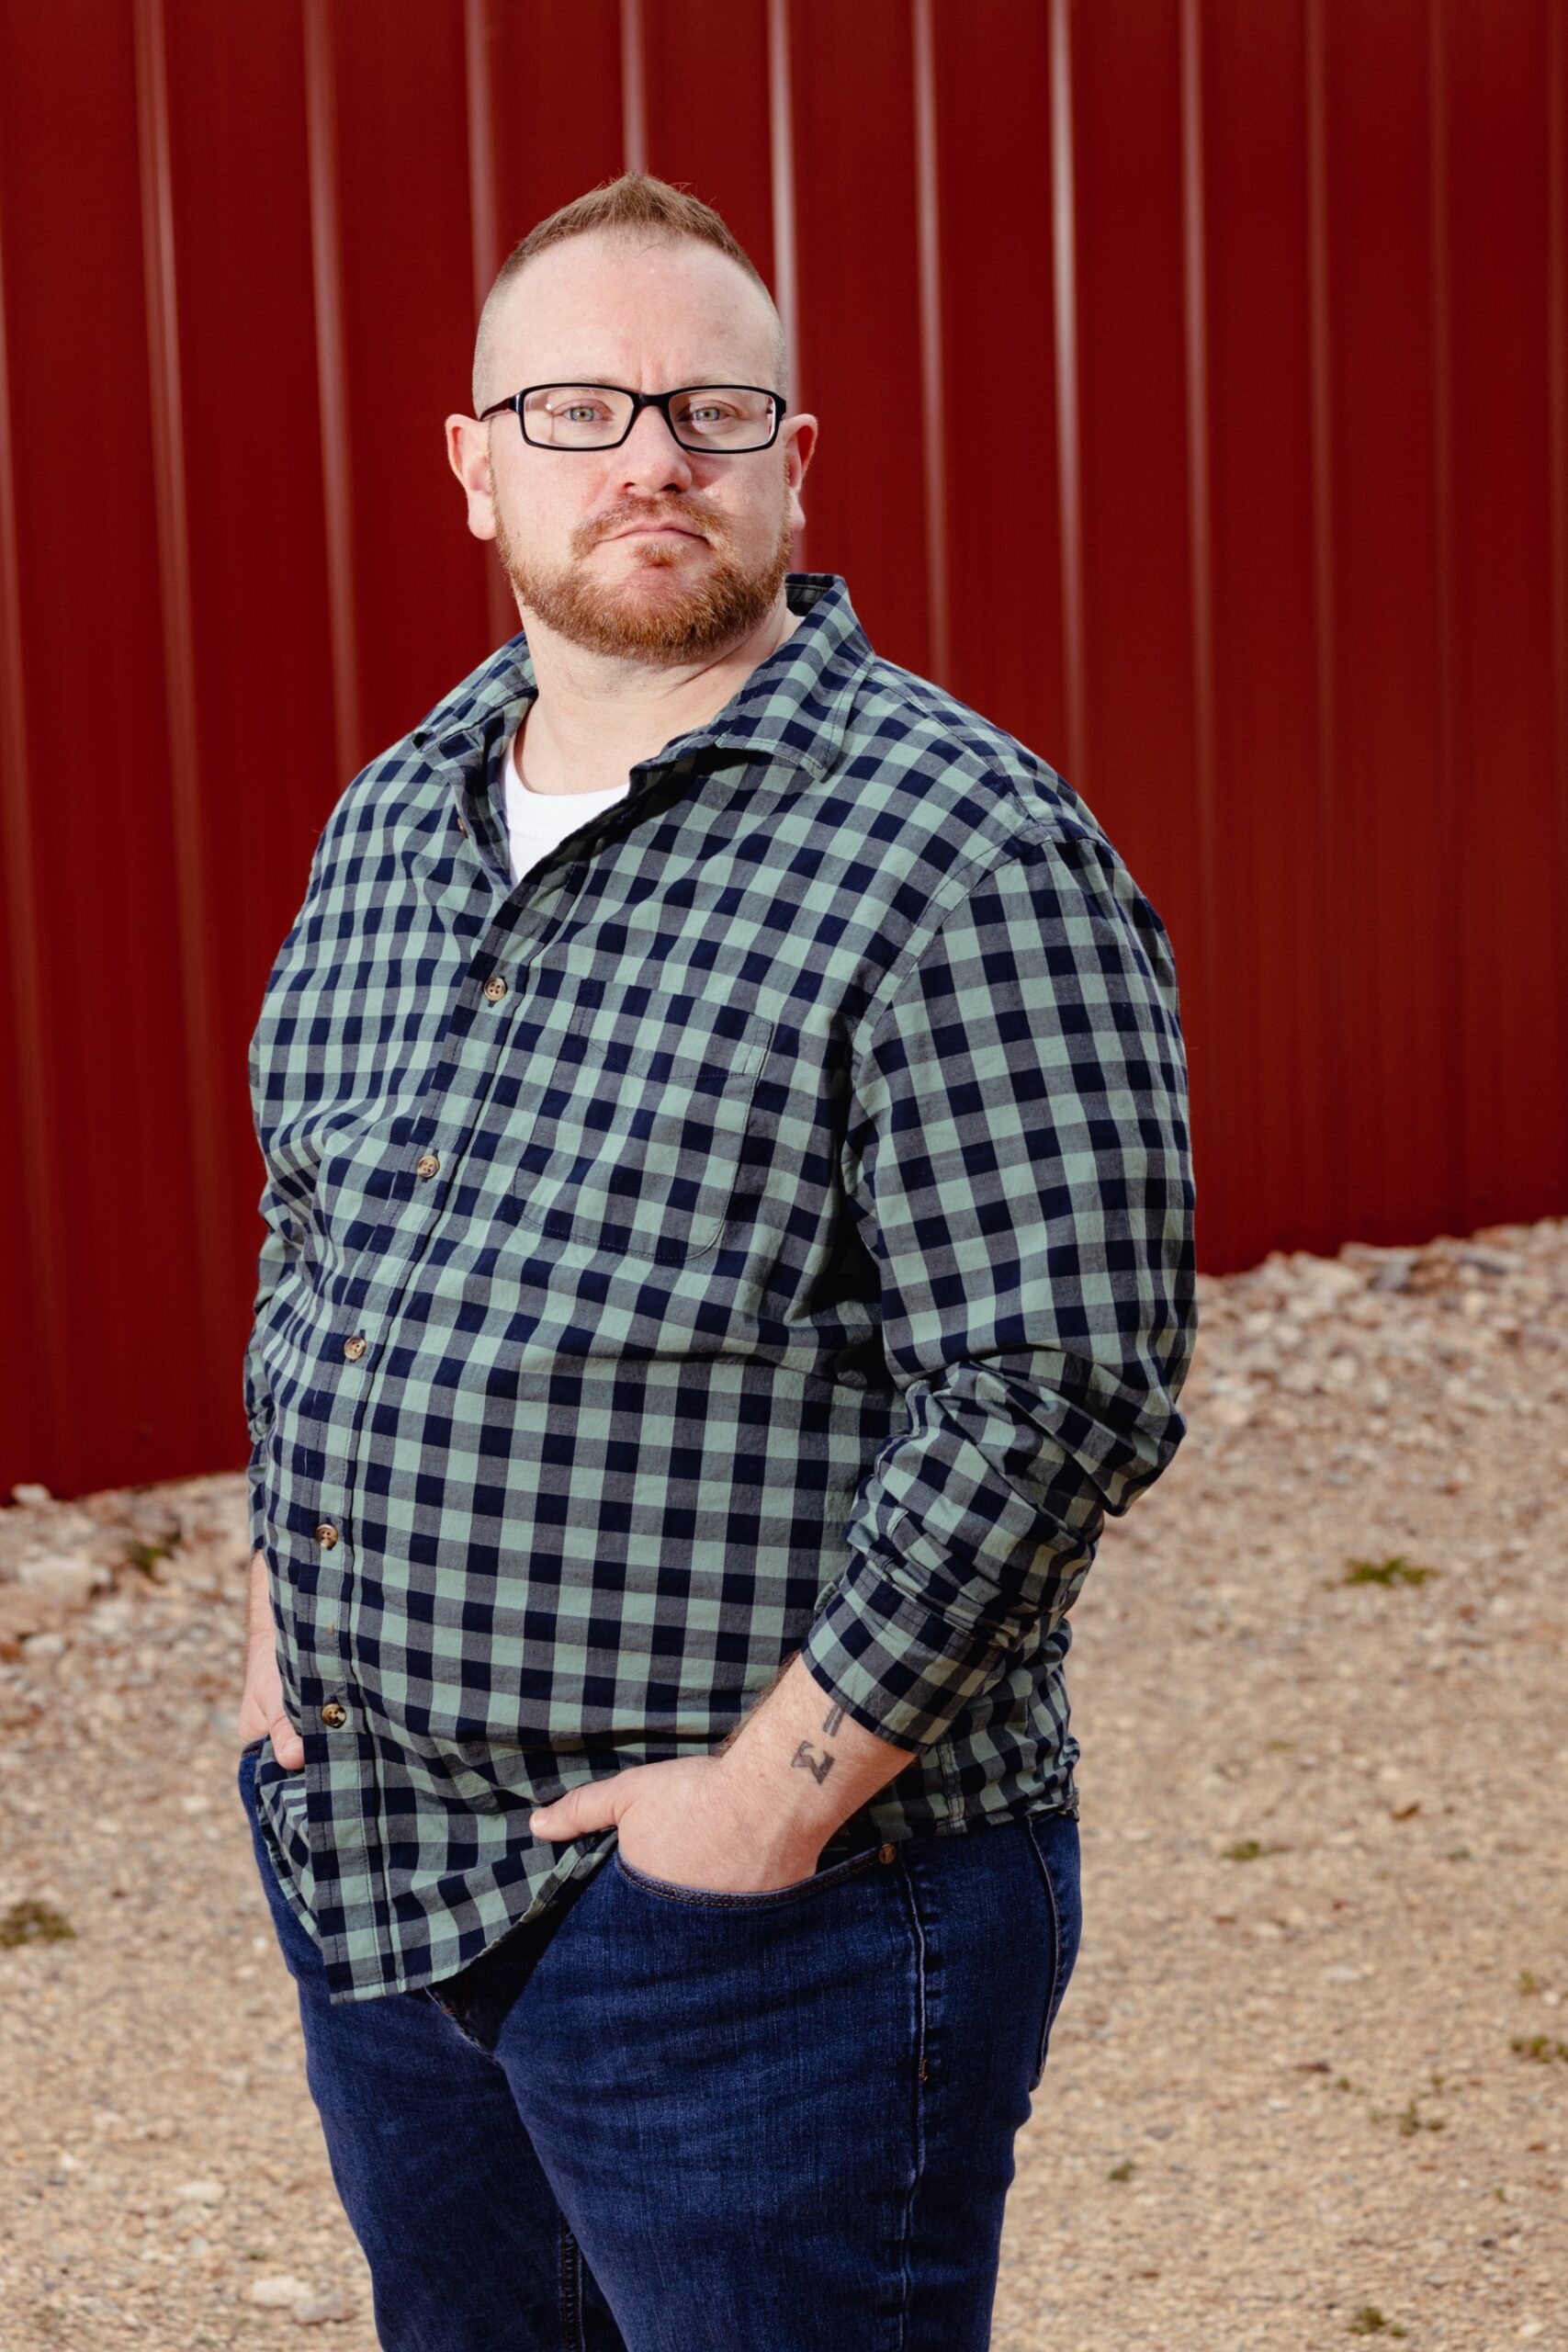 A man with reddish hair and a beard wears a green checked shirt, jeans, and rectangular glasses. He's standing in a dirt area in front of a red wall.